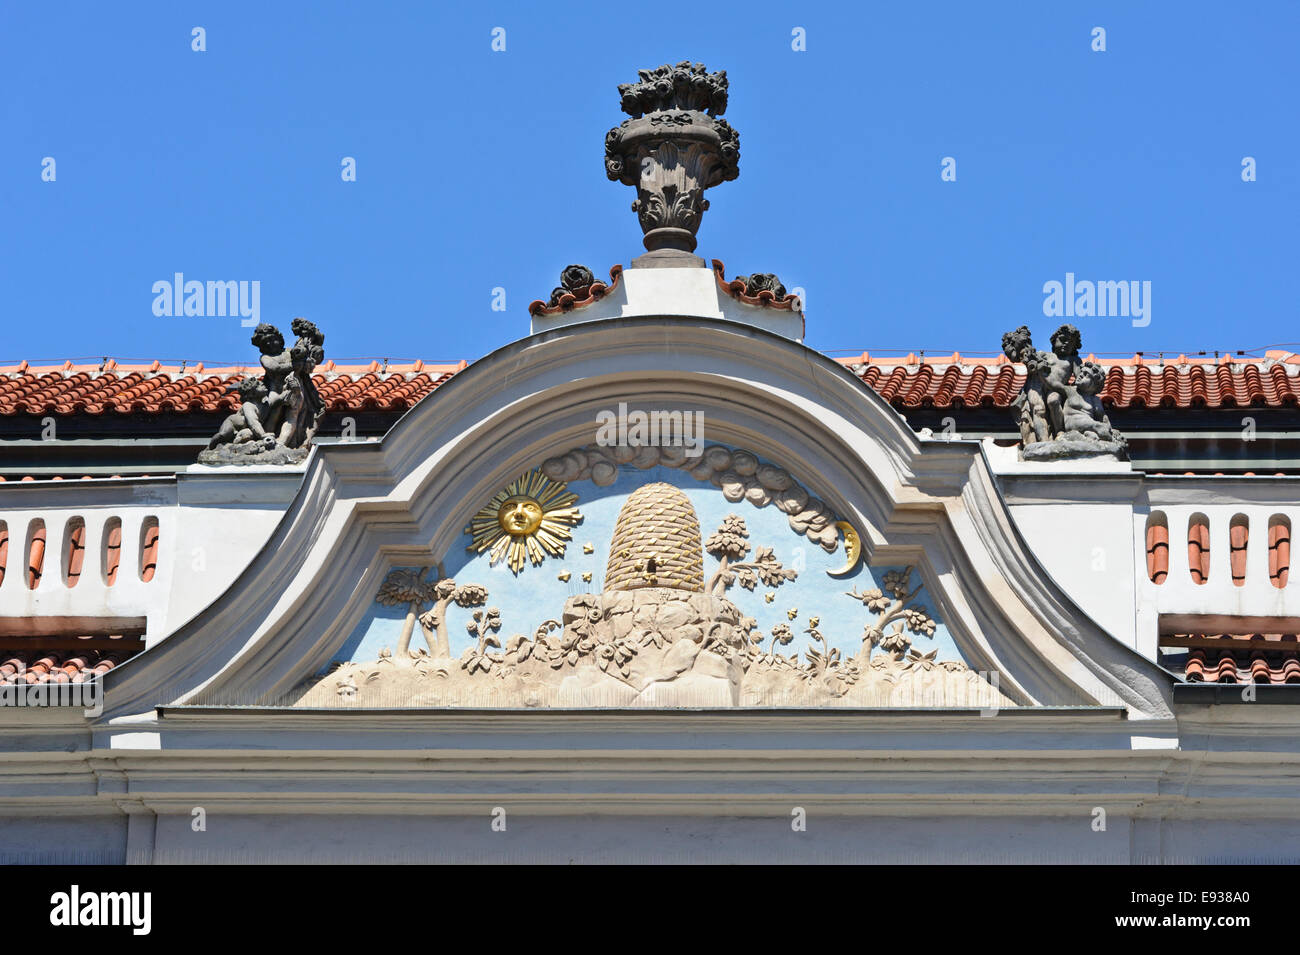 A decorative exterior of a building with bas relief and small statues, Prague, Czech Republic. Stock Photo